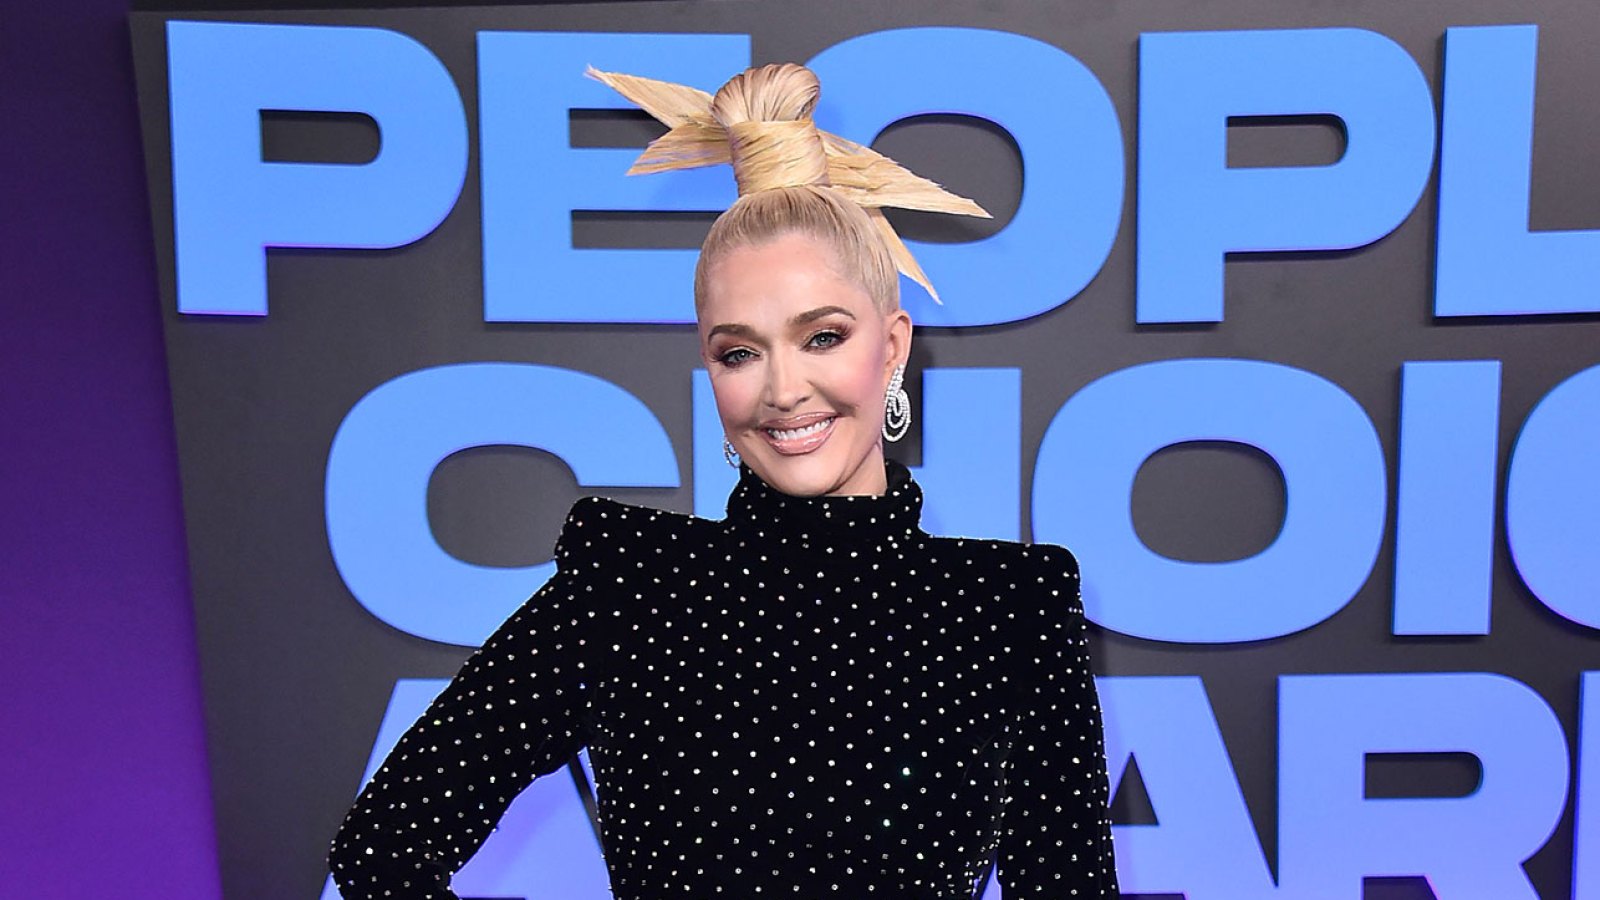 Erika Jayne Goes Full Glam For Rare Public Appearance at 2021 People’s Choice Awards Amid Legal Woes